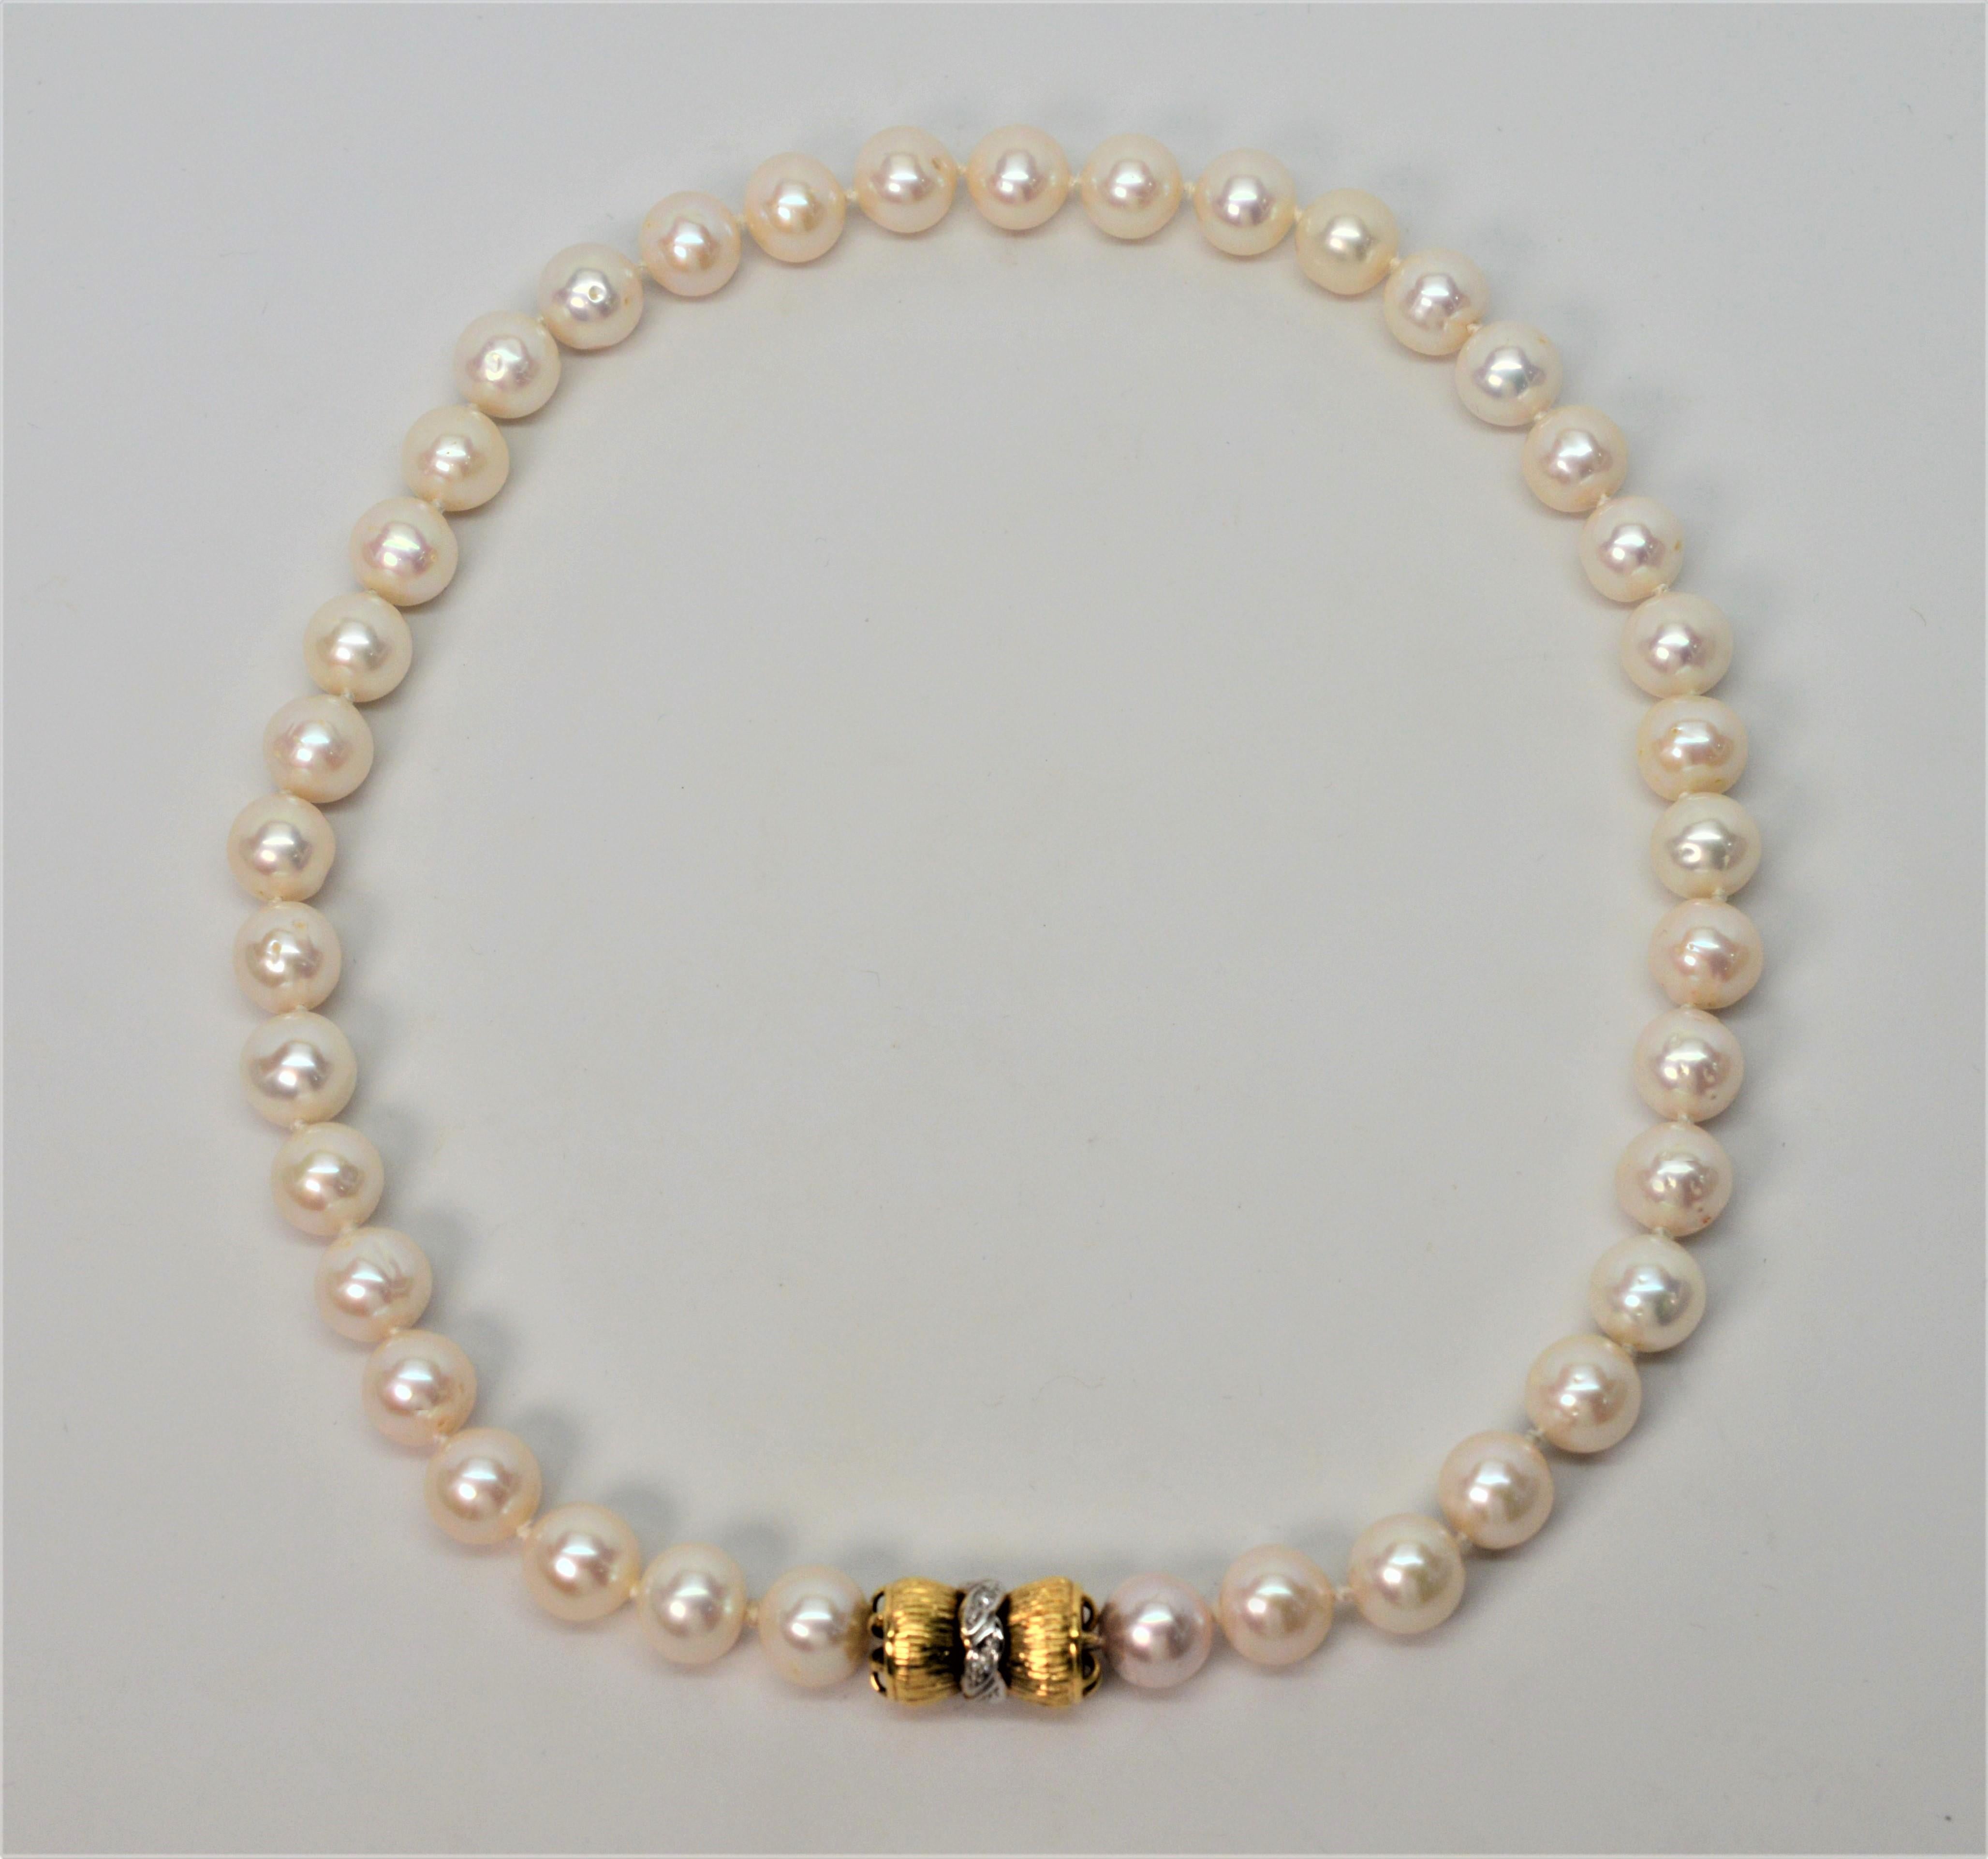 Beautiful white Akoya pearls create this classic and substantial strand with generous 9.75 x 10.25 mm Grade A cultured pearls.
Adorned with a sizable 3/4 inch fourteen karat 14K yellow gold bow clasp accented with diamonds can be worn as a front